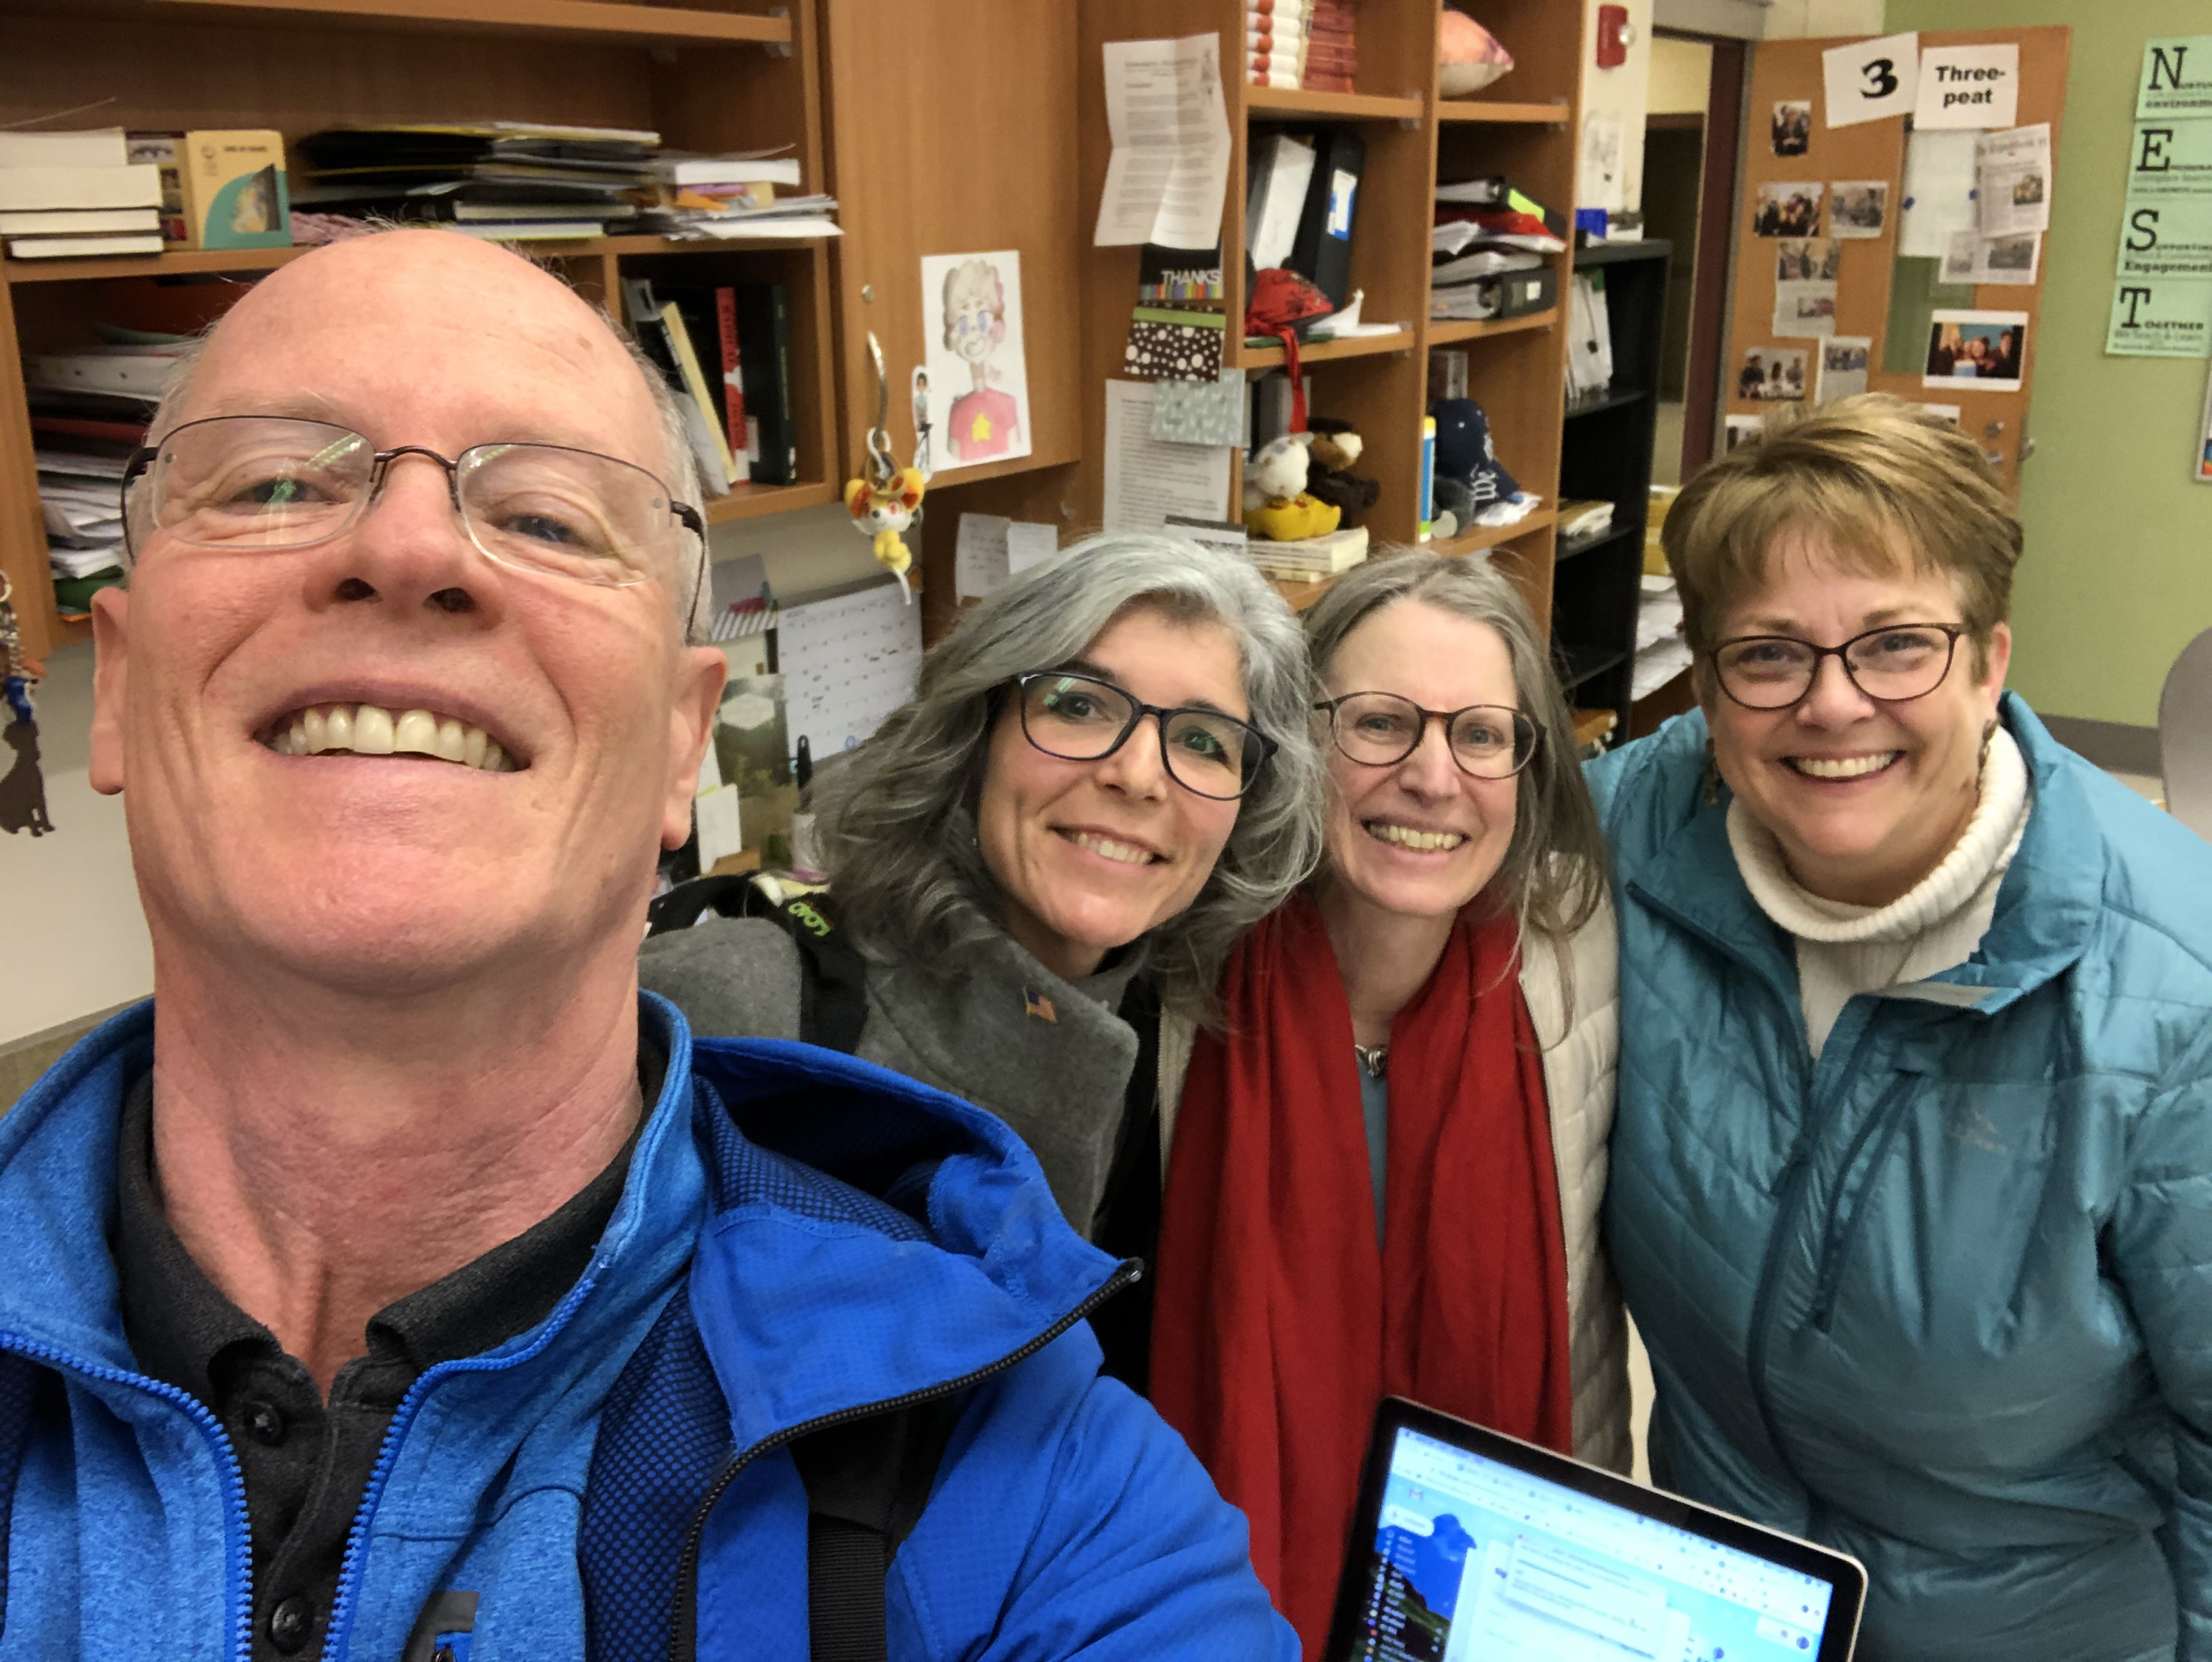 Emerging America's Rich Cairn takes a selfie in a classroom with Brown, Risler, and Alison Noyes.